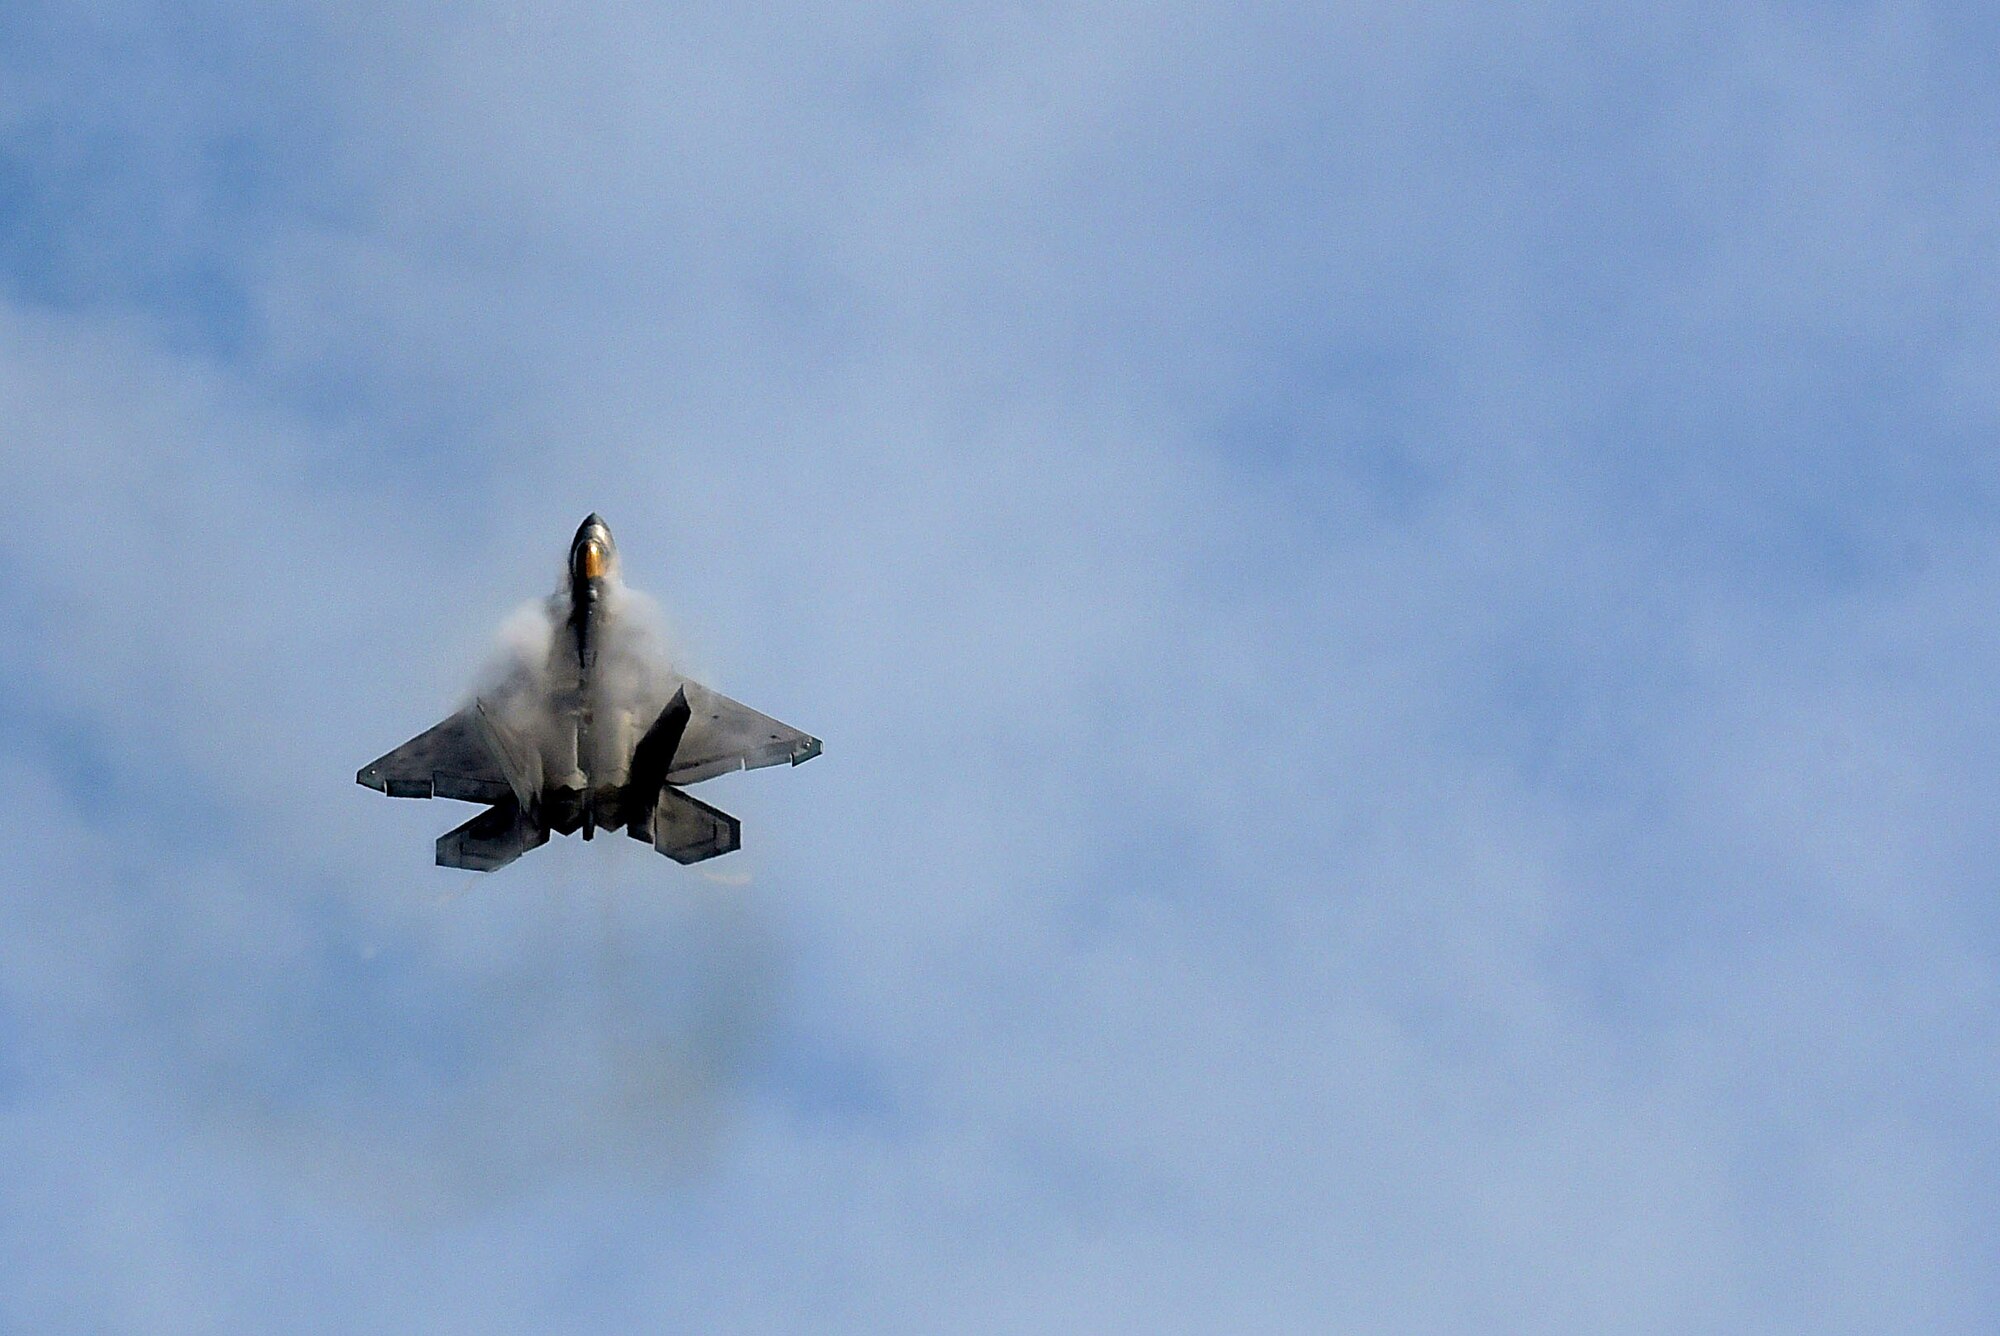 Maj. Daniel Dickinson, F-22 Raptor Demonstration Team pilot, displays the aircraft’s capabilities during a performance at the Wings Over Wayne Air Show, May 21, 2017, at Seymour Johnson Air Force Base, North Carolina. The air show is a two-day, free event which enables Seymour Johnson AFB to thank the local community for their support. (U.S. Air Force photo by Airman 1st Class Kenneth Boyton)